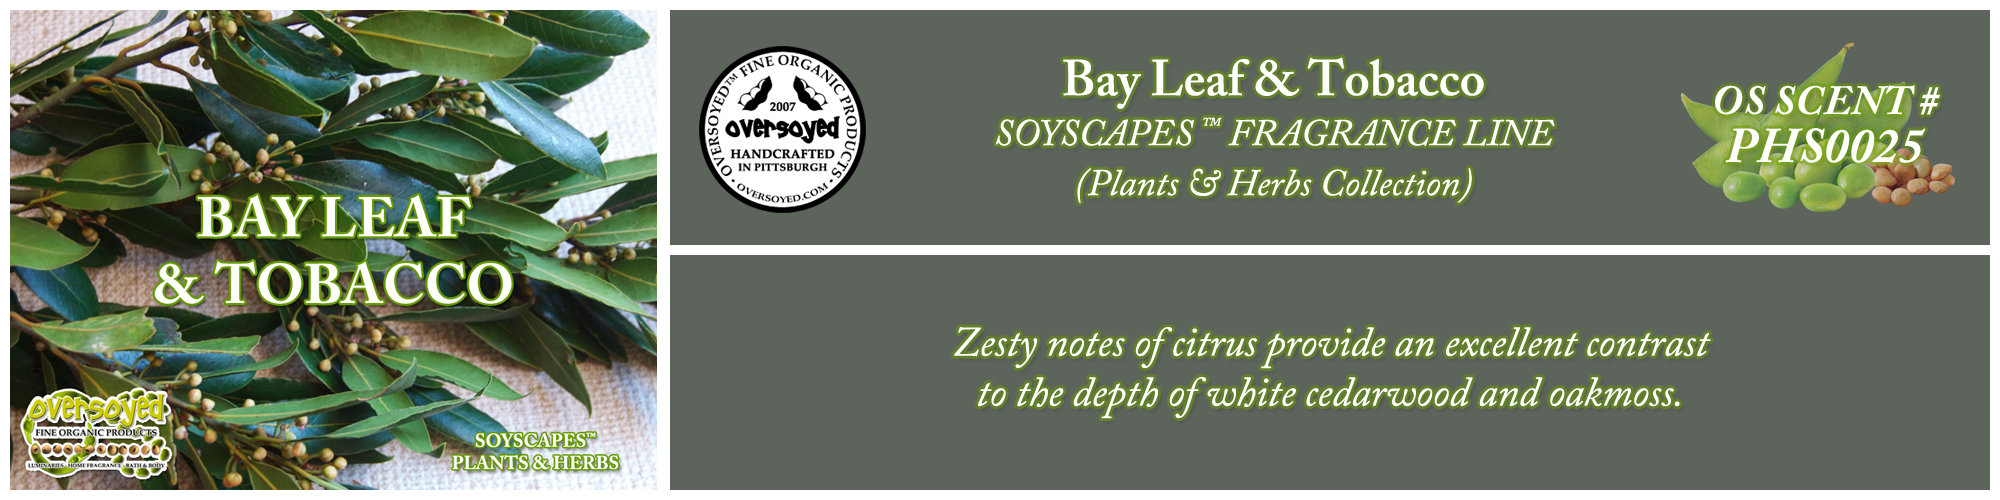 Bay Leaf & Tobacco Handcrafted Products Collection